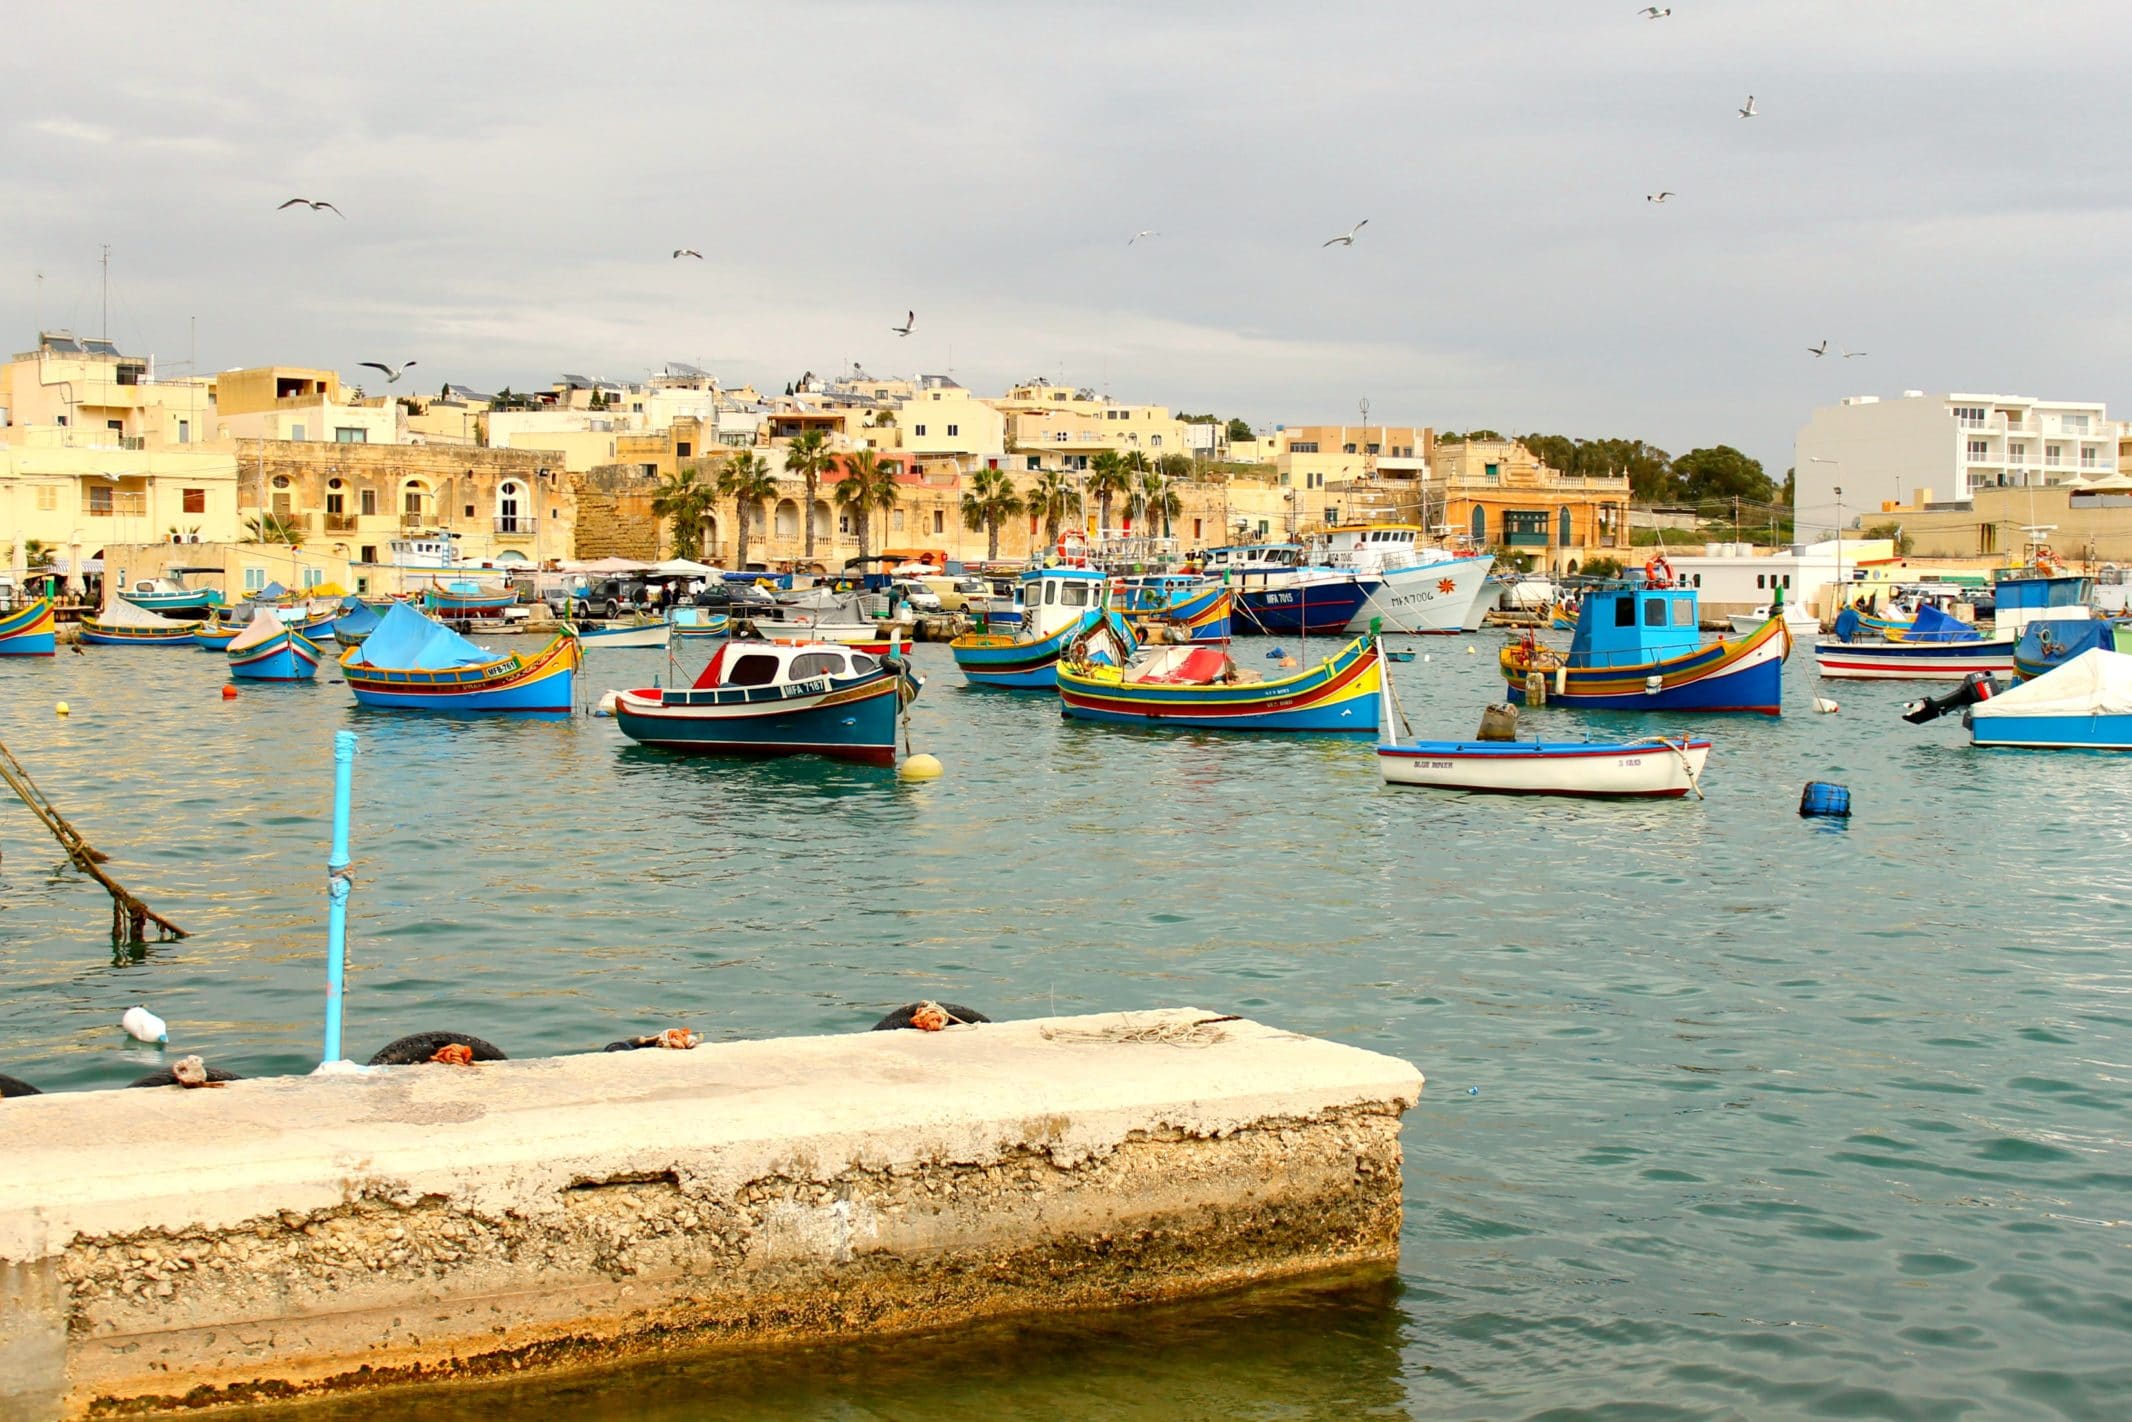 Corinthia Palace's central location means beautiful fishing villages like Marsaxlokk are only a 20 minute drive away.